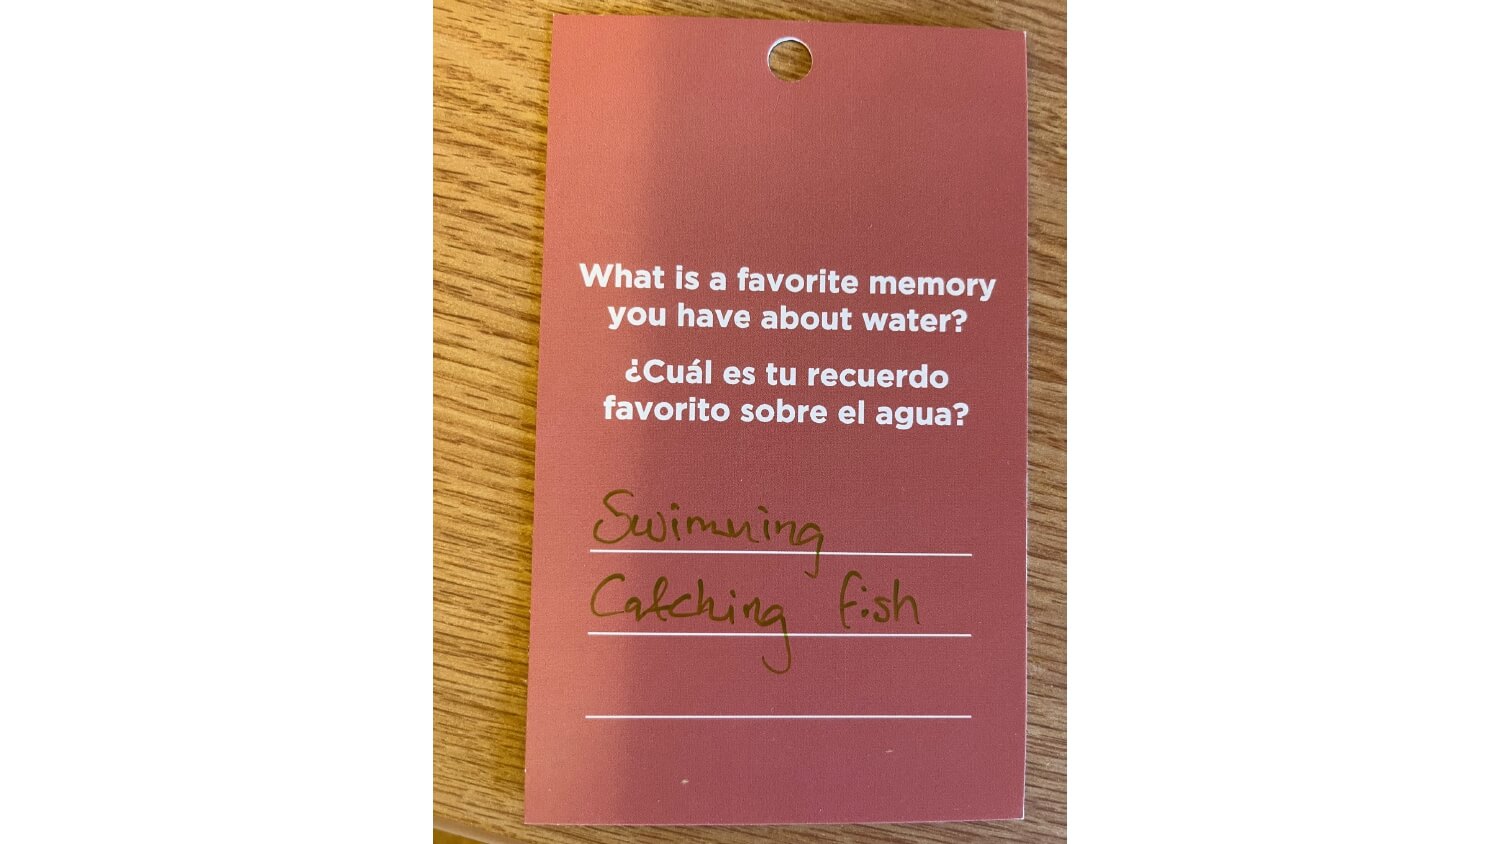 What is a favorite memory you have about water? Swimming. Catching fish.